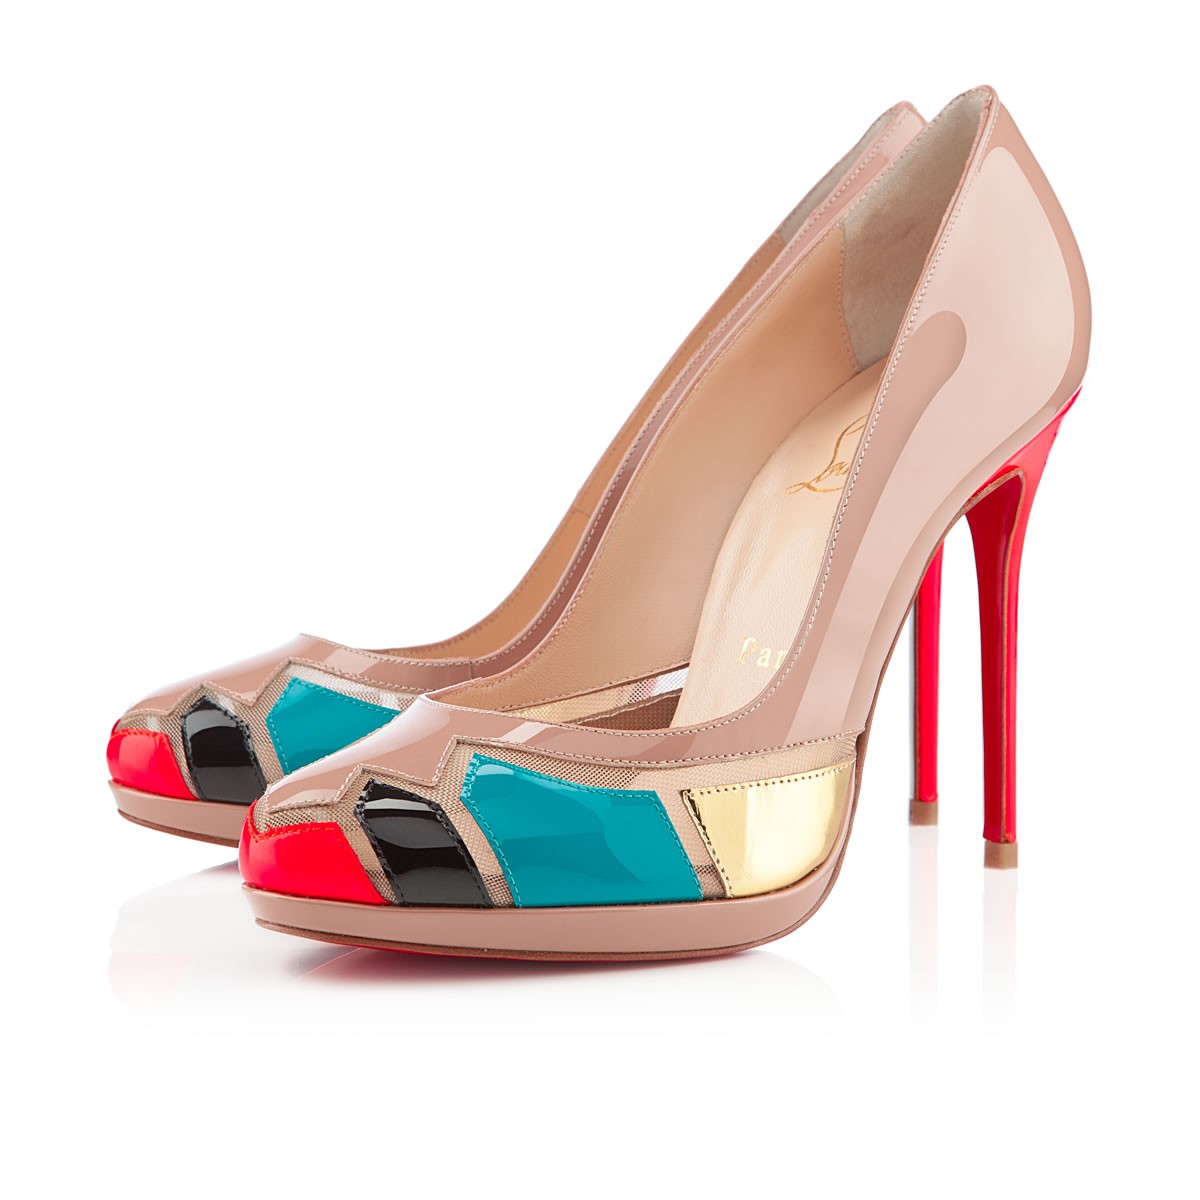 Christian Louboutin  Astrogirl 120mm Pumps Nude